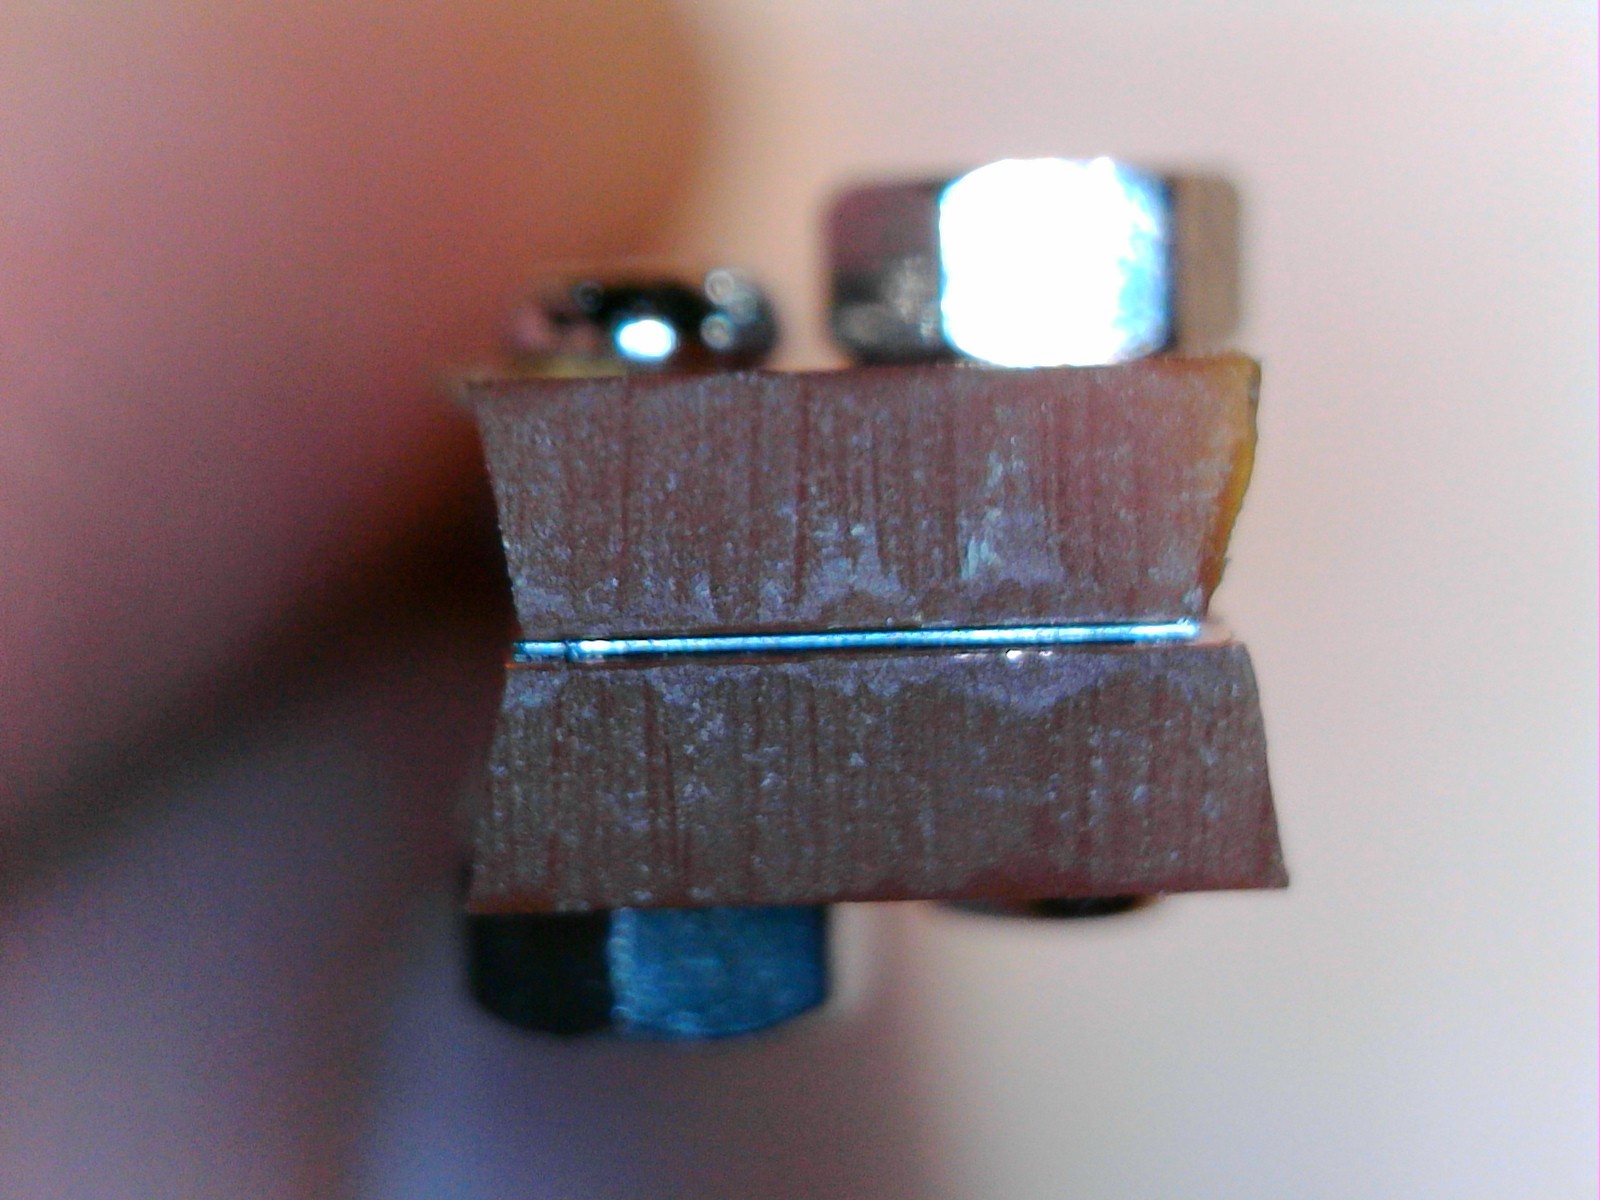 A view of the bottom of the gen 2 printhead. The "nozzle" is so thin on either side of the heating element as to be nearly invisible, even at this high level of magnification. It was ~30 microns tall, X 500 microns wide, thus why it is so hard to see! The heating element is visible center field, between the two orange-brown strip board pieces, as a narrow black/gray/white line.